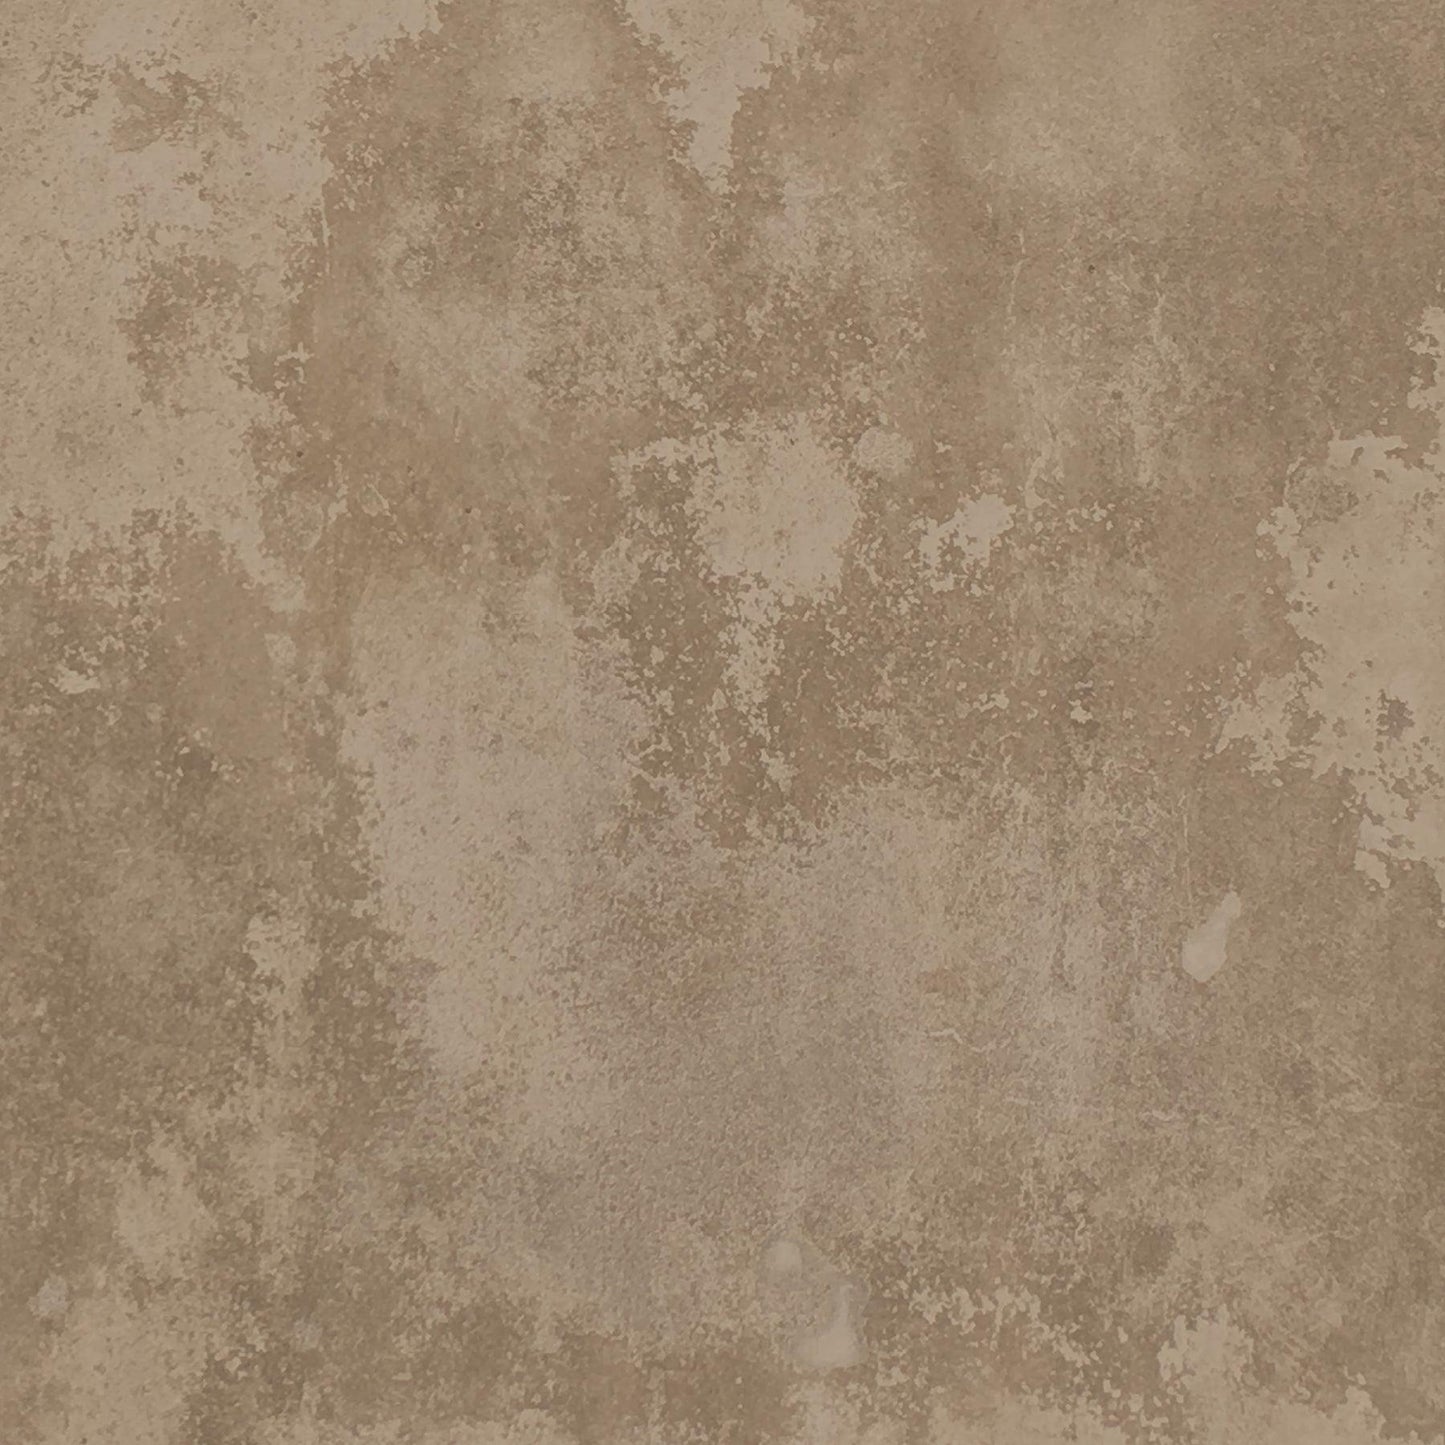 Baked Taupe Photography Backdrop - Bubb Market